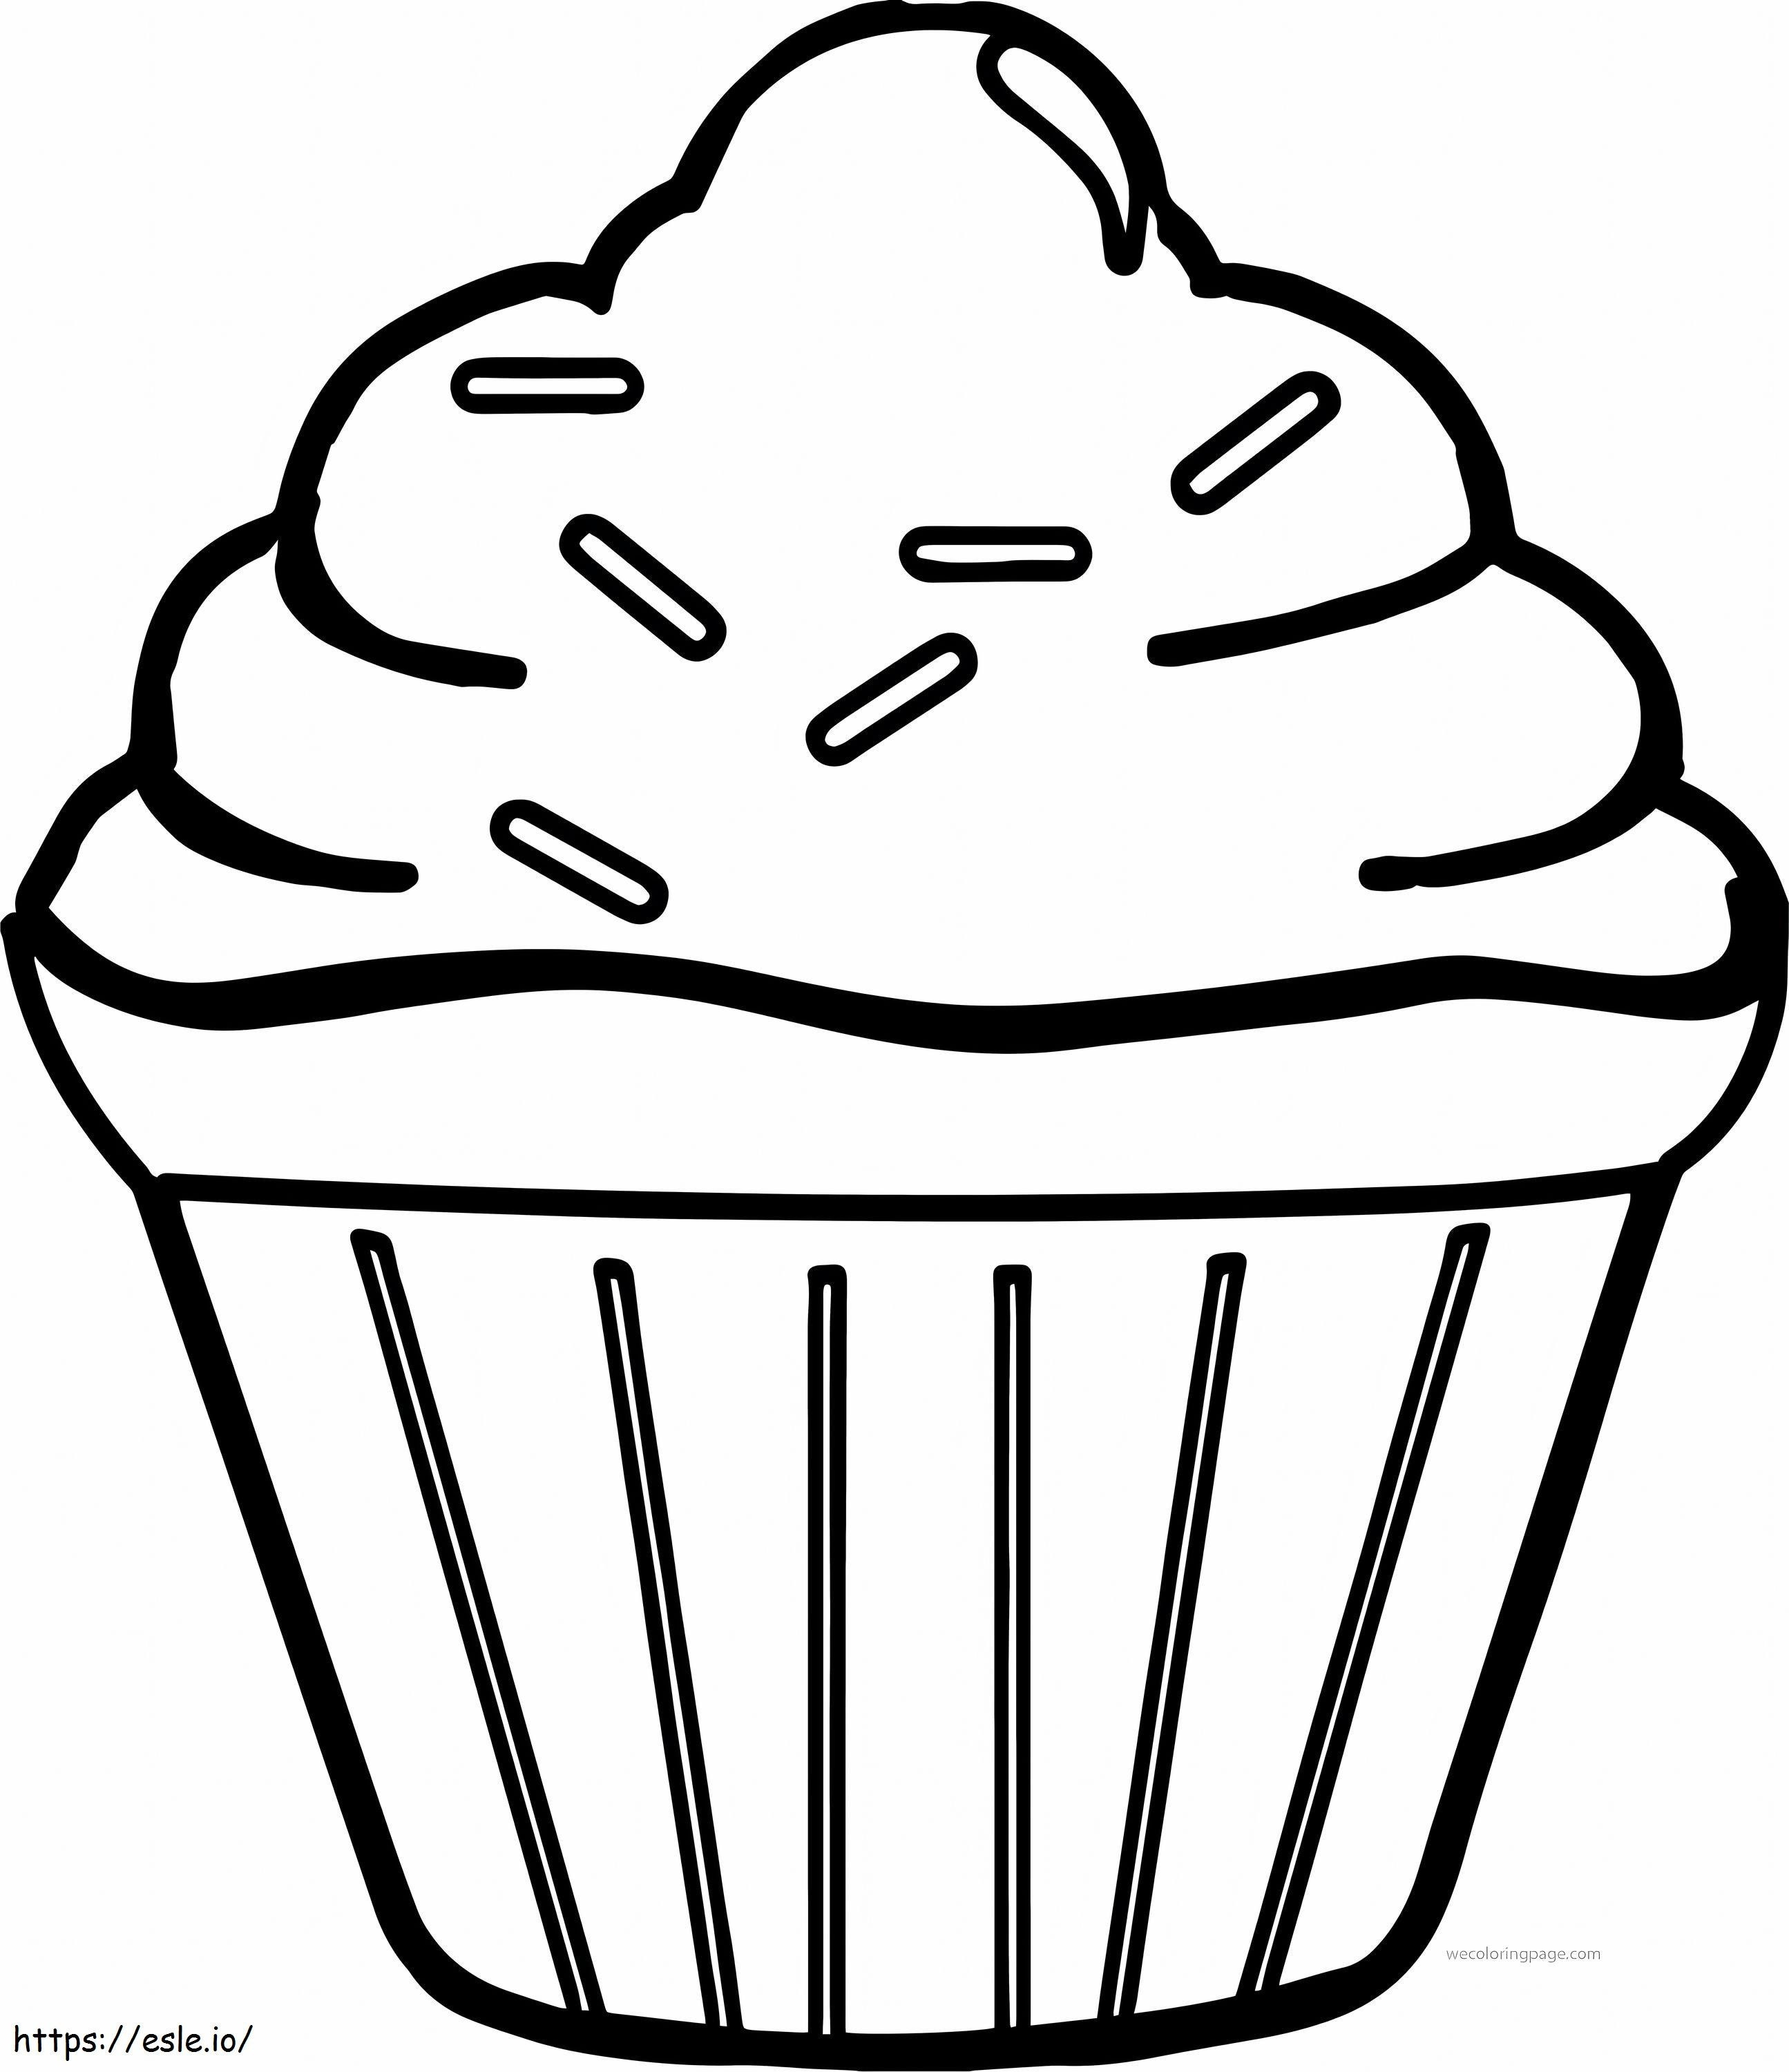 Easy Cake Food Scaled coloring page